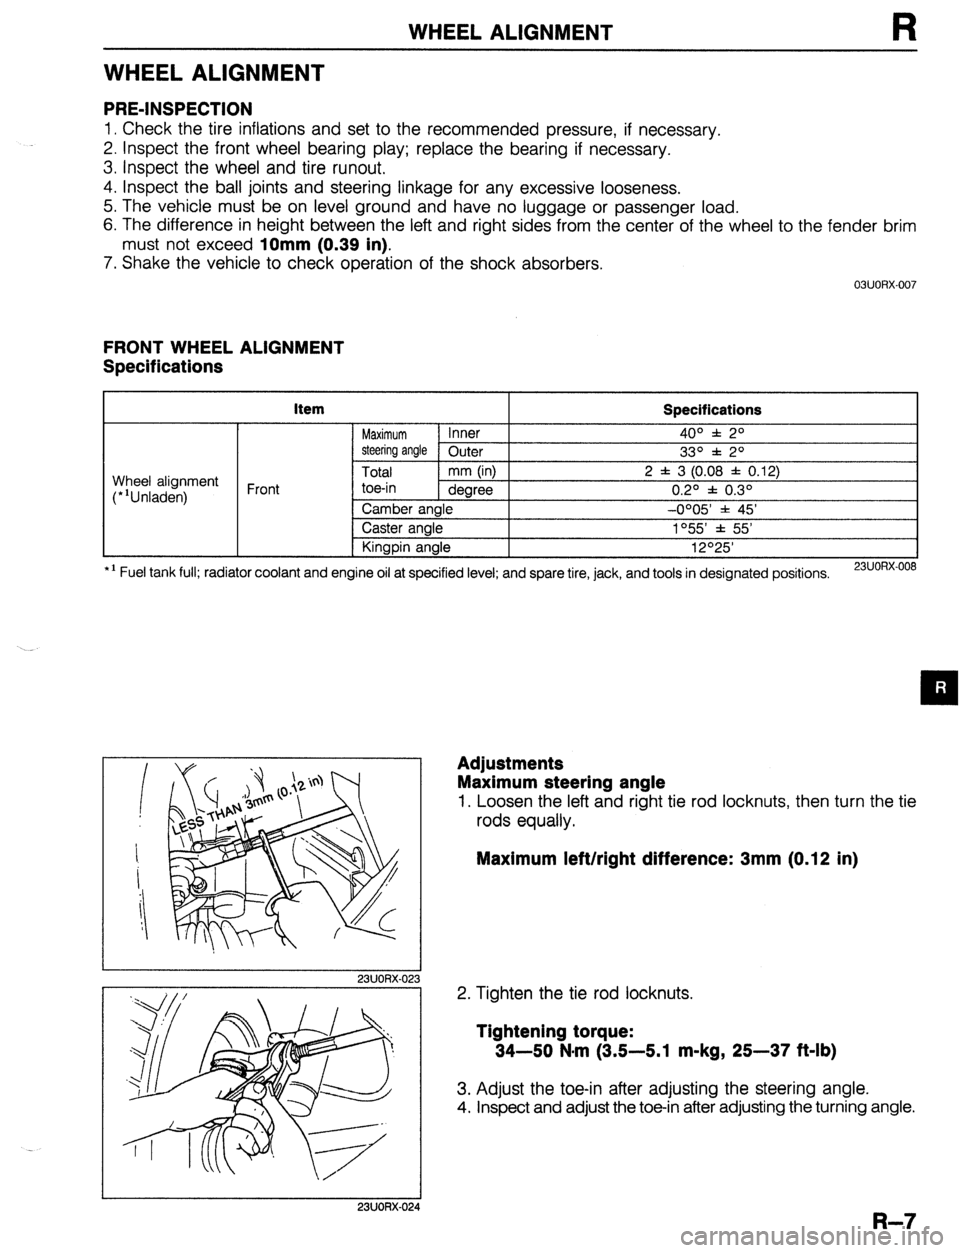 MAZDA 323 1989  Factory Repair Manual WHEEL ALIGNMENT 
WHEEL ALIGNMENT 
PRE-INSPECTION 
1. Check the tire inflations and set to the recommended pressure, if necessary. 
2. Inspect the front wheel bearing play; replace the bearing if neces